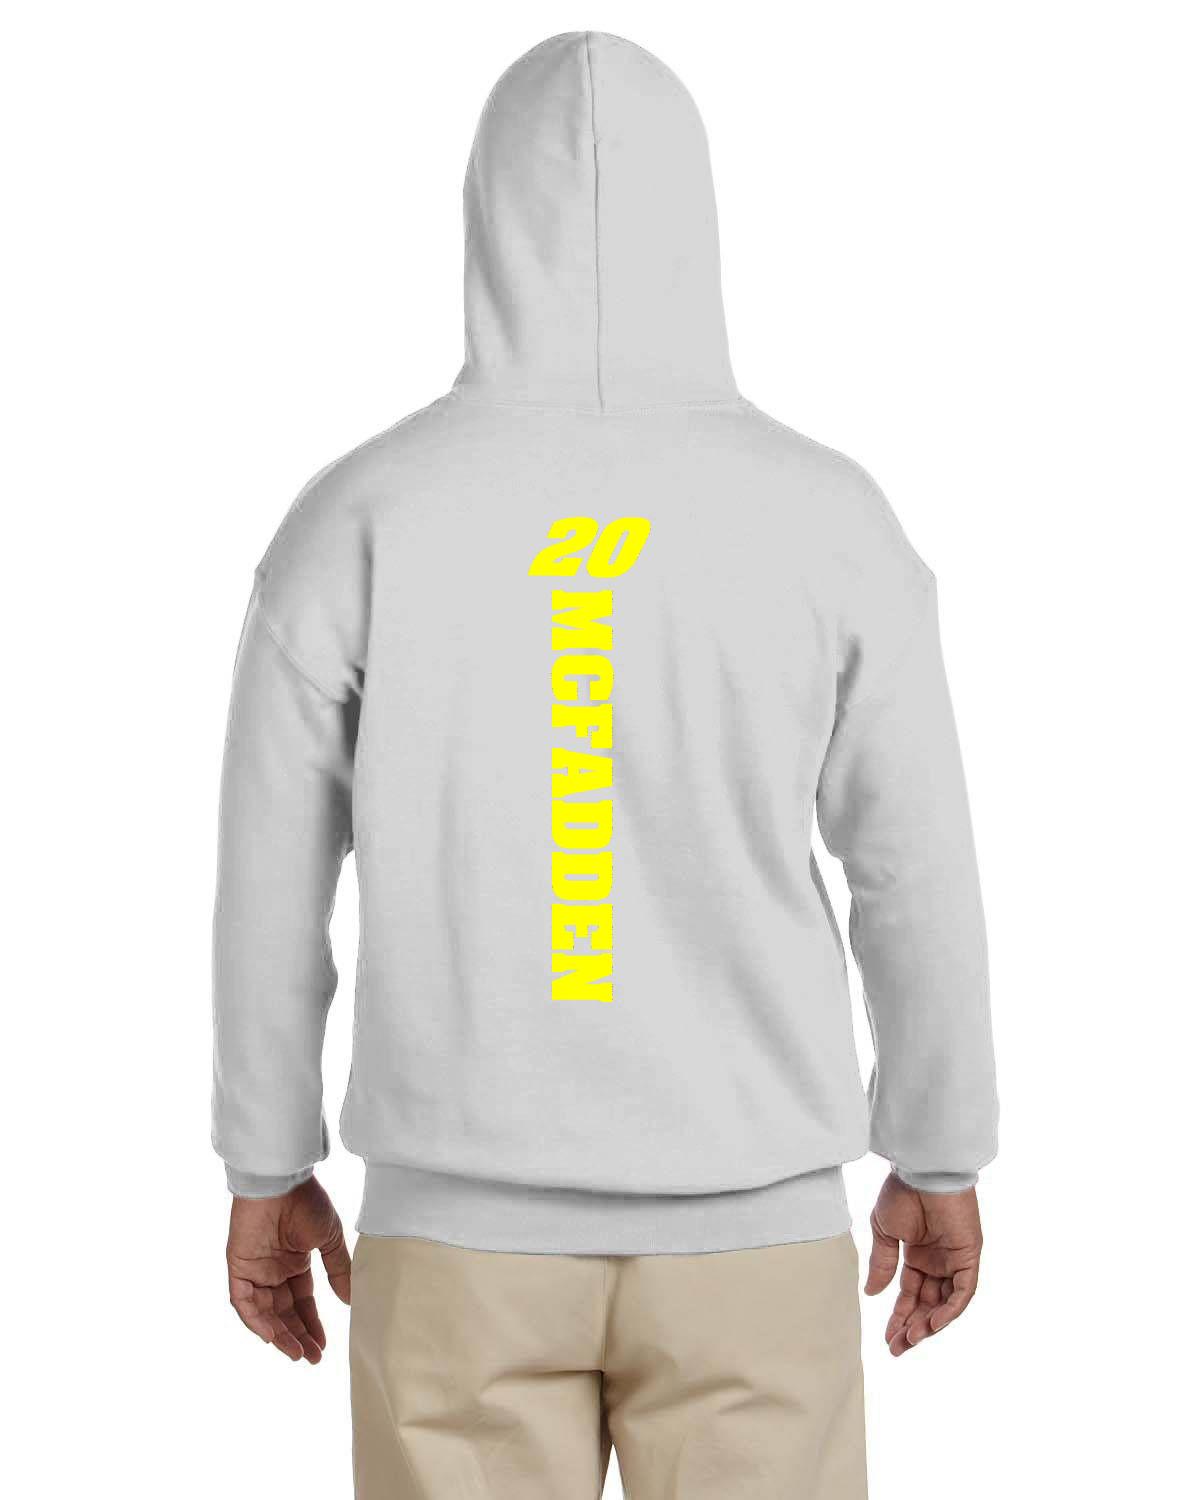 Cole McFadden / Grassroots Racing Name/number Hoodie